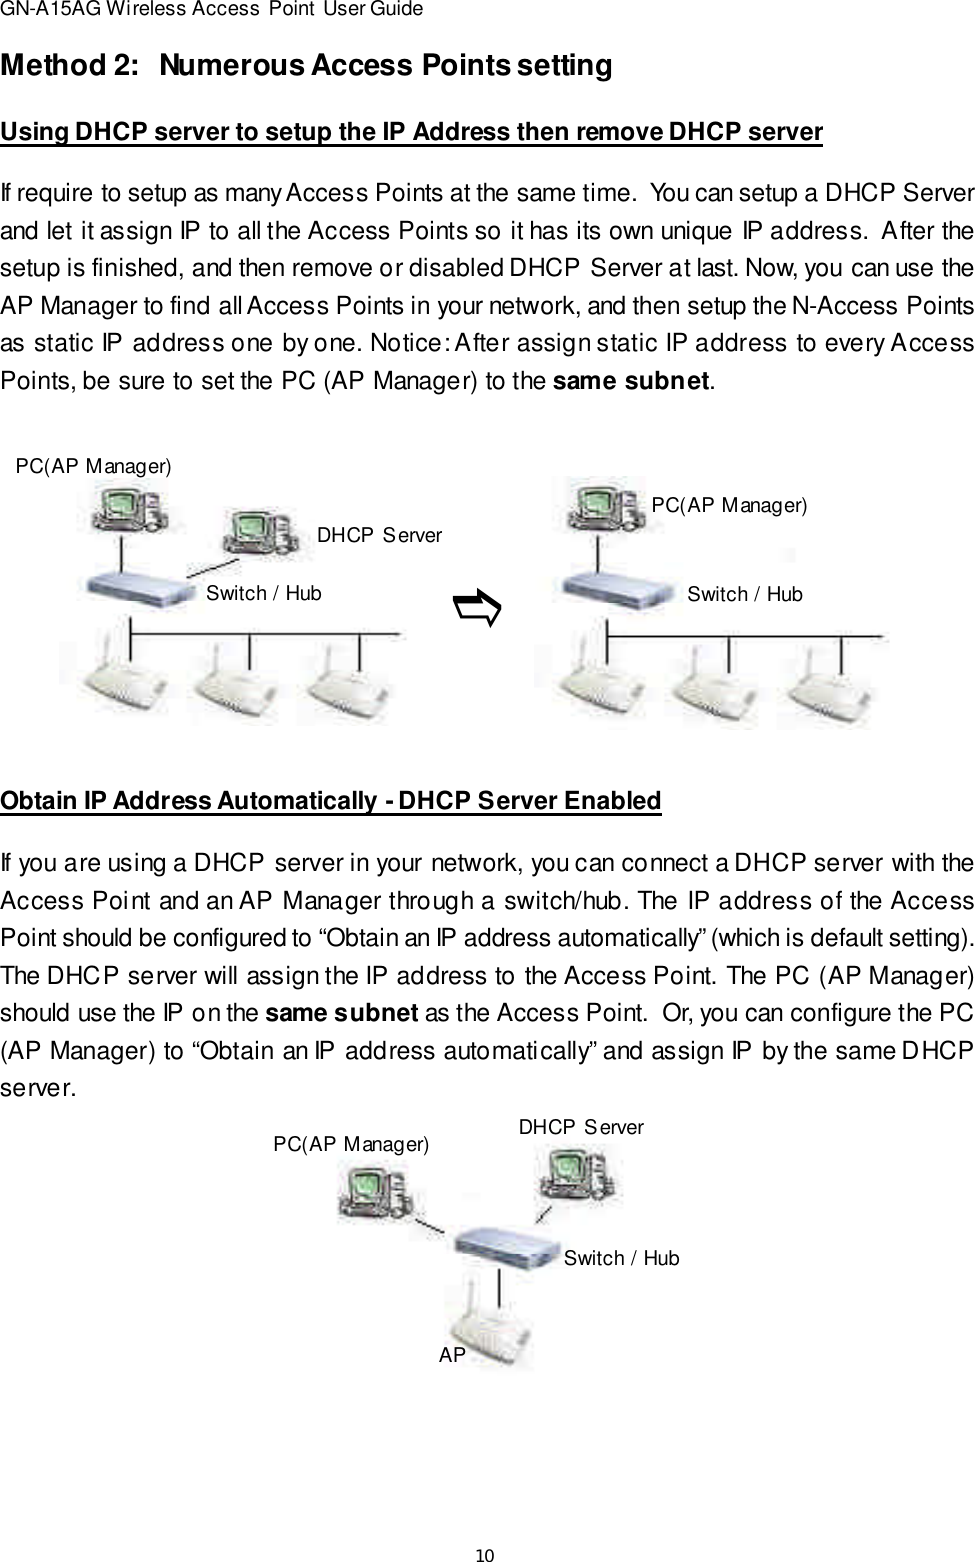 10GN-A15AG Wireless Access Point User GuideMethod 2:   Numerous Access Points settingIf require to setup as many Access Points at the same time.  You can setup a DHCP Serverand let it assign IP to all the Access Points so it has its own unique IP address.  After thesetup is finished, and then remove or disabled DHCP Server at last. Now, you can use theAP Manager to find all Access Points in your network, and then setup the N-Access Pointsas static IP address one by one. Notice: After assign static IP address to every AccessPoints, be sure to set the PC (AP Manager) to the same subnet.Using DHCP server to setup the IP Address then remove DHCP serverPC(AP Manager)DHCP ServerSwitch / HubPC(AP Manager)Switch / HubeObtain IP Address Automatically - DHCP Server EnabledIf you are using a DHCP server in your network, you can connect a DHCP server with theAccess Point and an AP Manager through a switch/hub. The IP address of the AccessPoint should be configured to “Obtain an IP address automatically” (which is default setting).The DHCP server will assign the IP address to the Access Point. The PC (AP Manager)should use the IP on the same subnet as the Access Point.  Or, you can configure the PC(AP Manager) to “Obtain an IP address automatically” and assign IP by the same DHCPserver.PC(AP Manager) DHCP ServerSwitch / HubAP